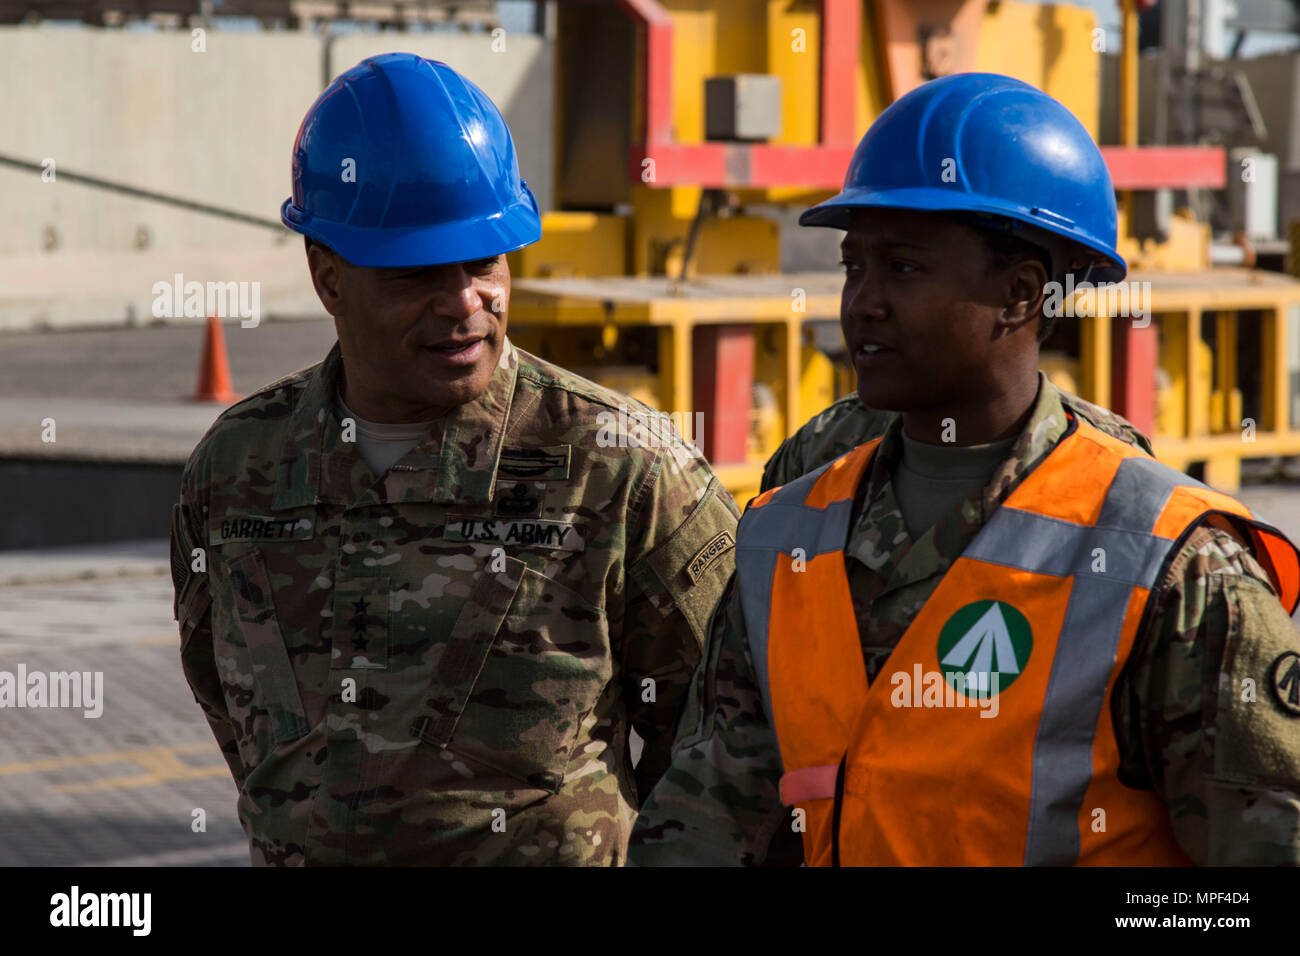 Lt. Gen. Michael X. Garrett, the U.S. Army Central Commander, is briefed by an 840th Transportation Battalion Soldier during his tour of the Port of Shuaiba, Kuwait Feb. 17. The 840th Transportation Battalion is responsible for incoming and outgoing shipments of equipment utilized by the units stationed in the USARCENT area of operations. Stock Photo